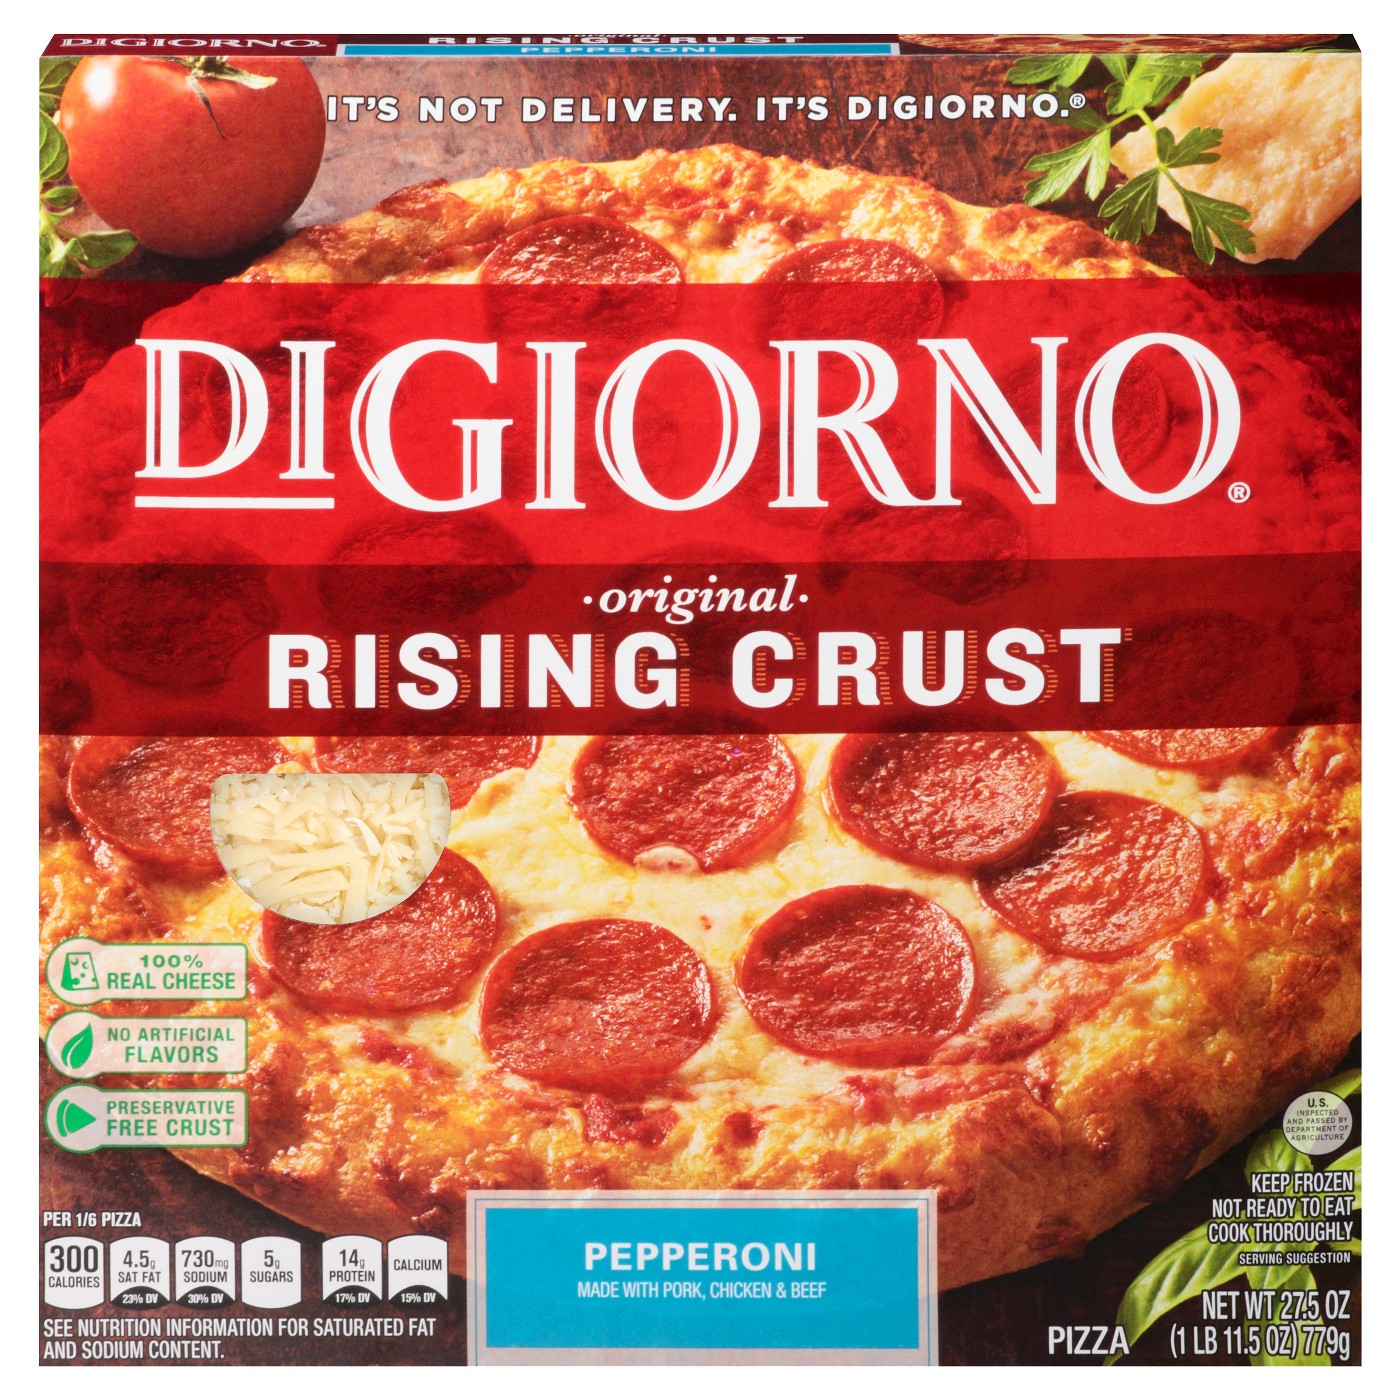 NEW 6/3 DIGIORNO PIZZA COUPON (PRINT NOW)